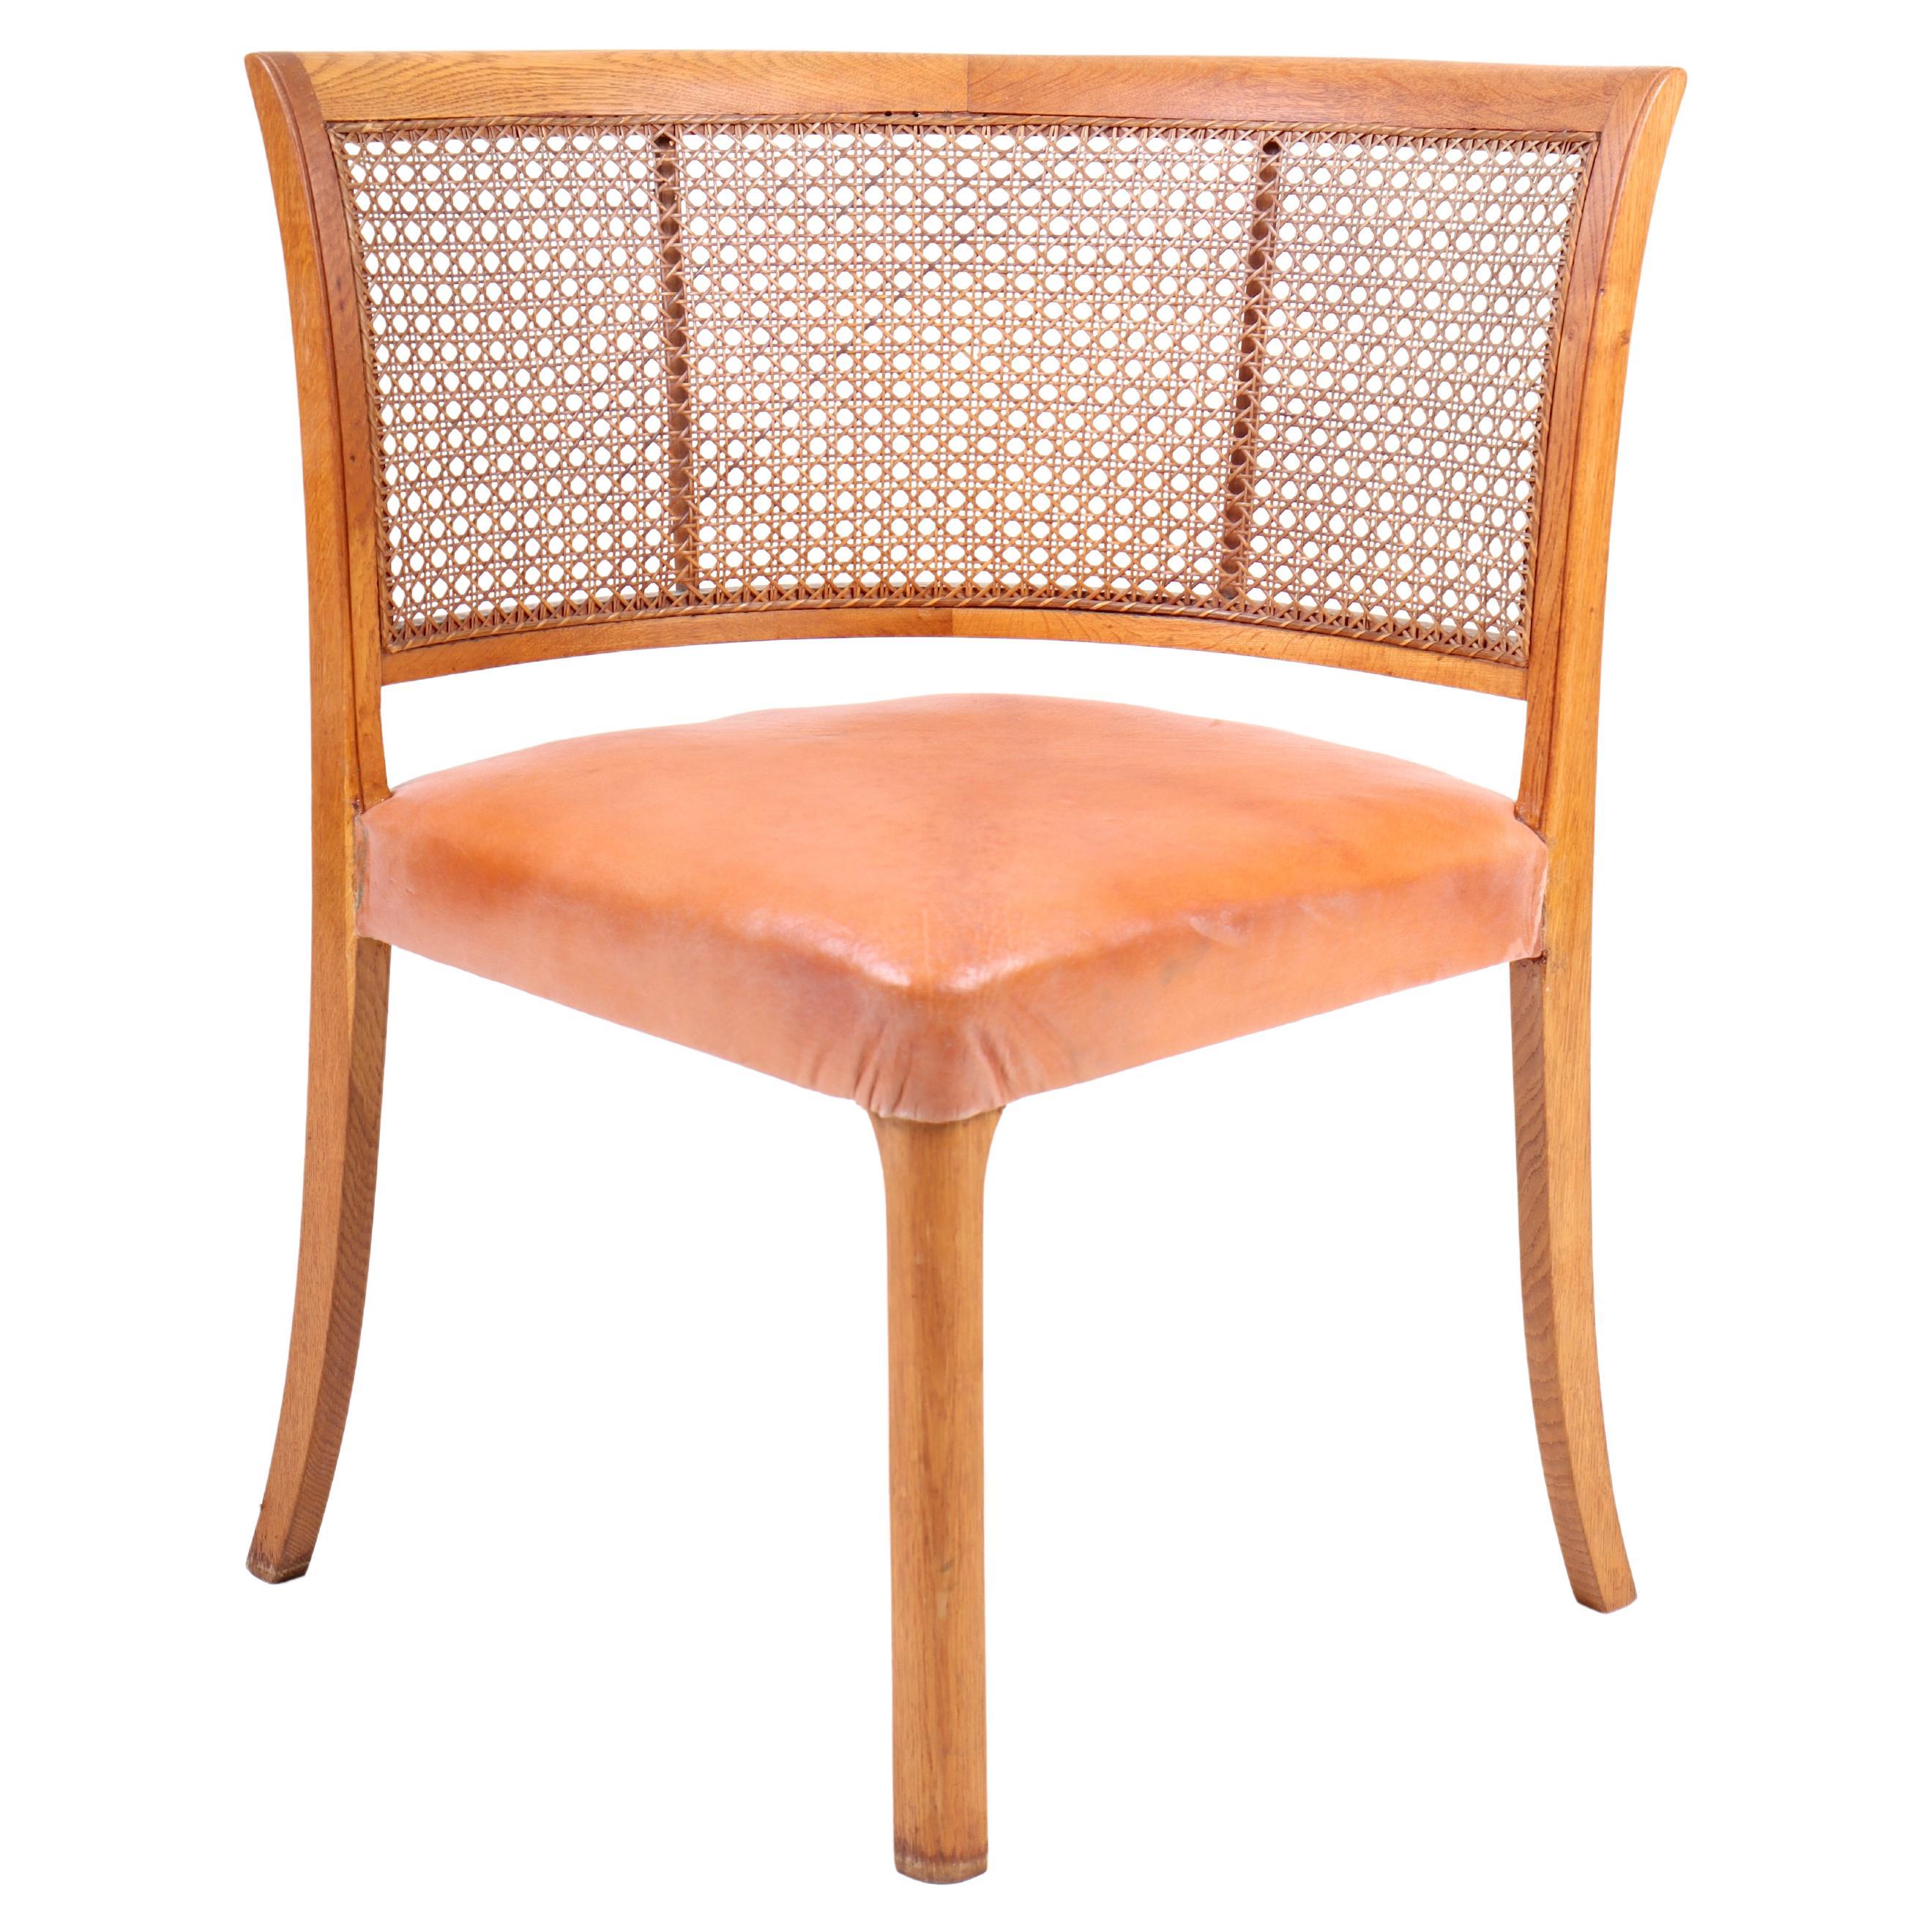 Danish Side Chair in Oak and Cognac Leather, 1940s